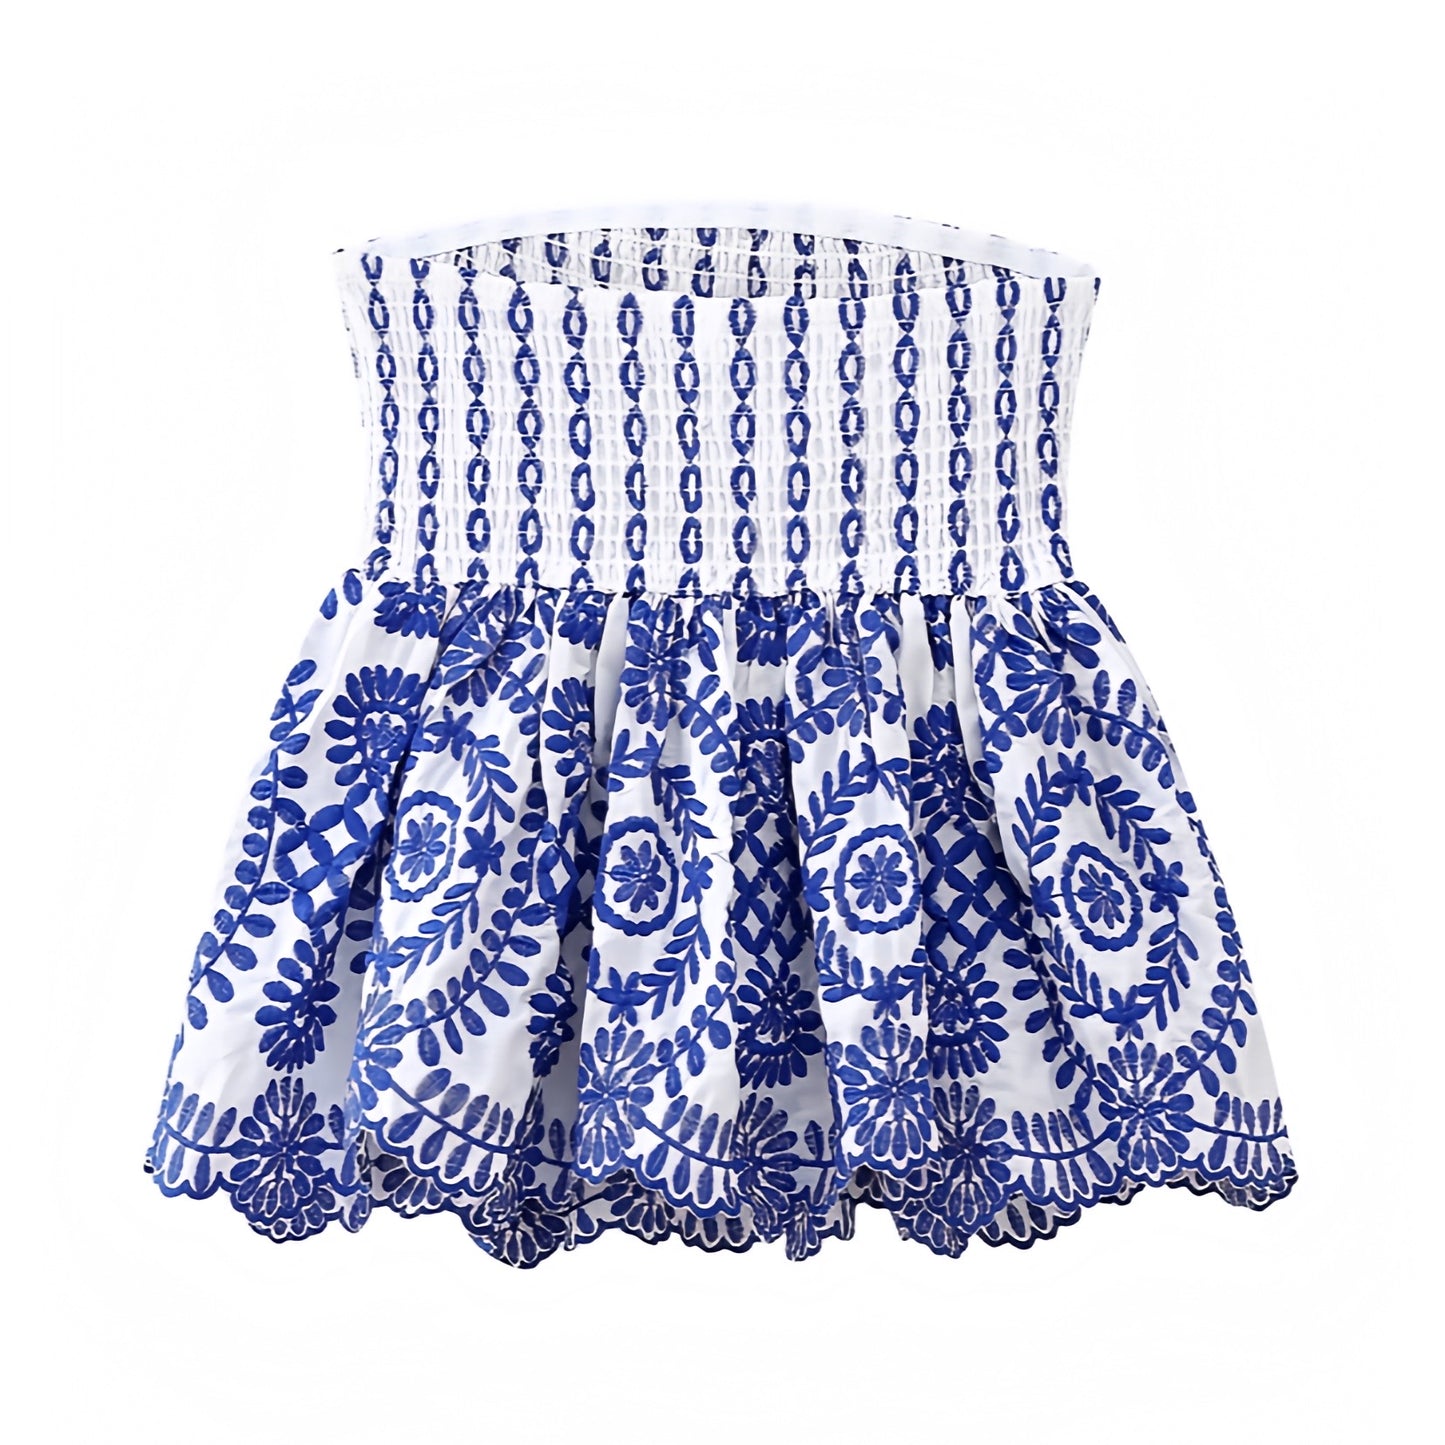 dark-navy-blue-and-white-eyelet-embroidered-floral-patterned-striped-smocked-ruffle-strapless-bandeau-cami-tank-top-blouse-women-ladies-chic-trendy-spring-2024-summer-elegant-casual-preppy-style-coastal-granddaughter-european-greece-beach-wear-tropical-vacation-shirts-zara-revolve-charo-ruiz-fillyboo